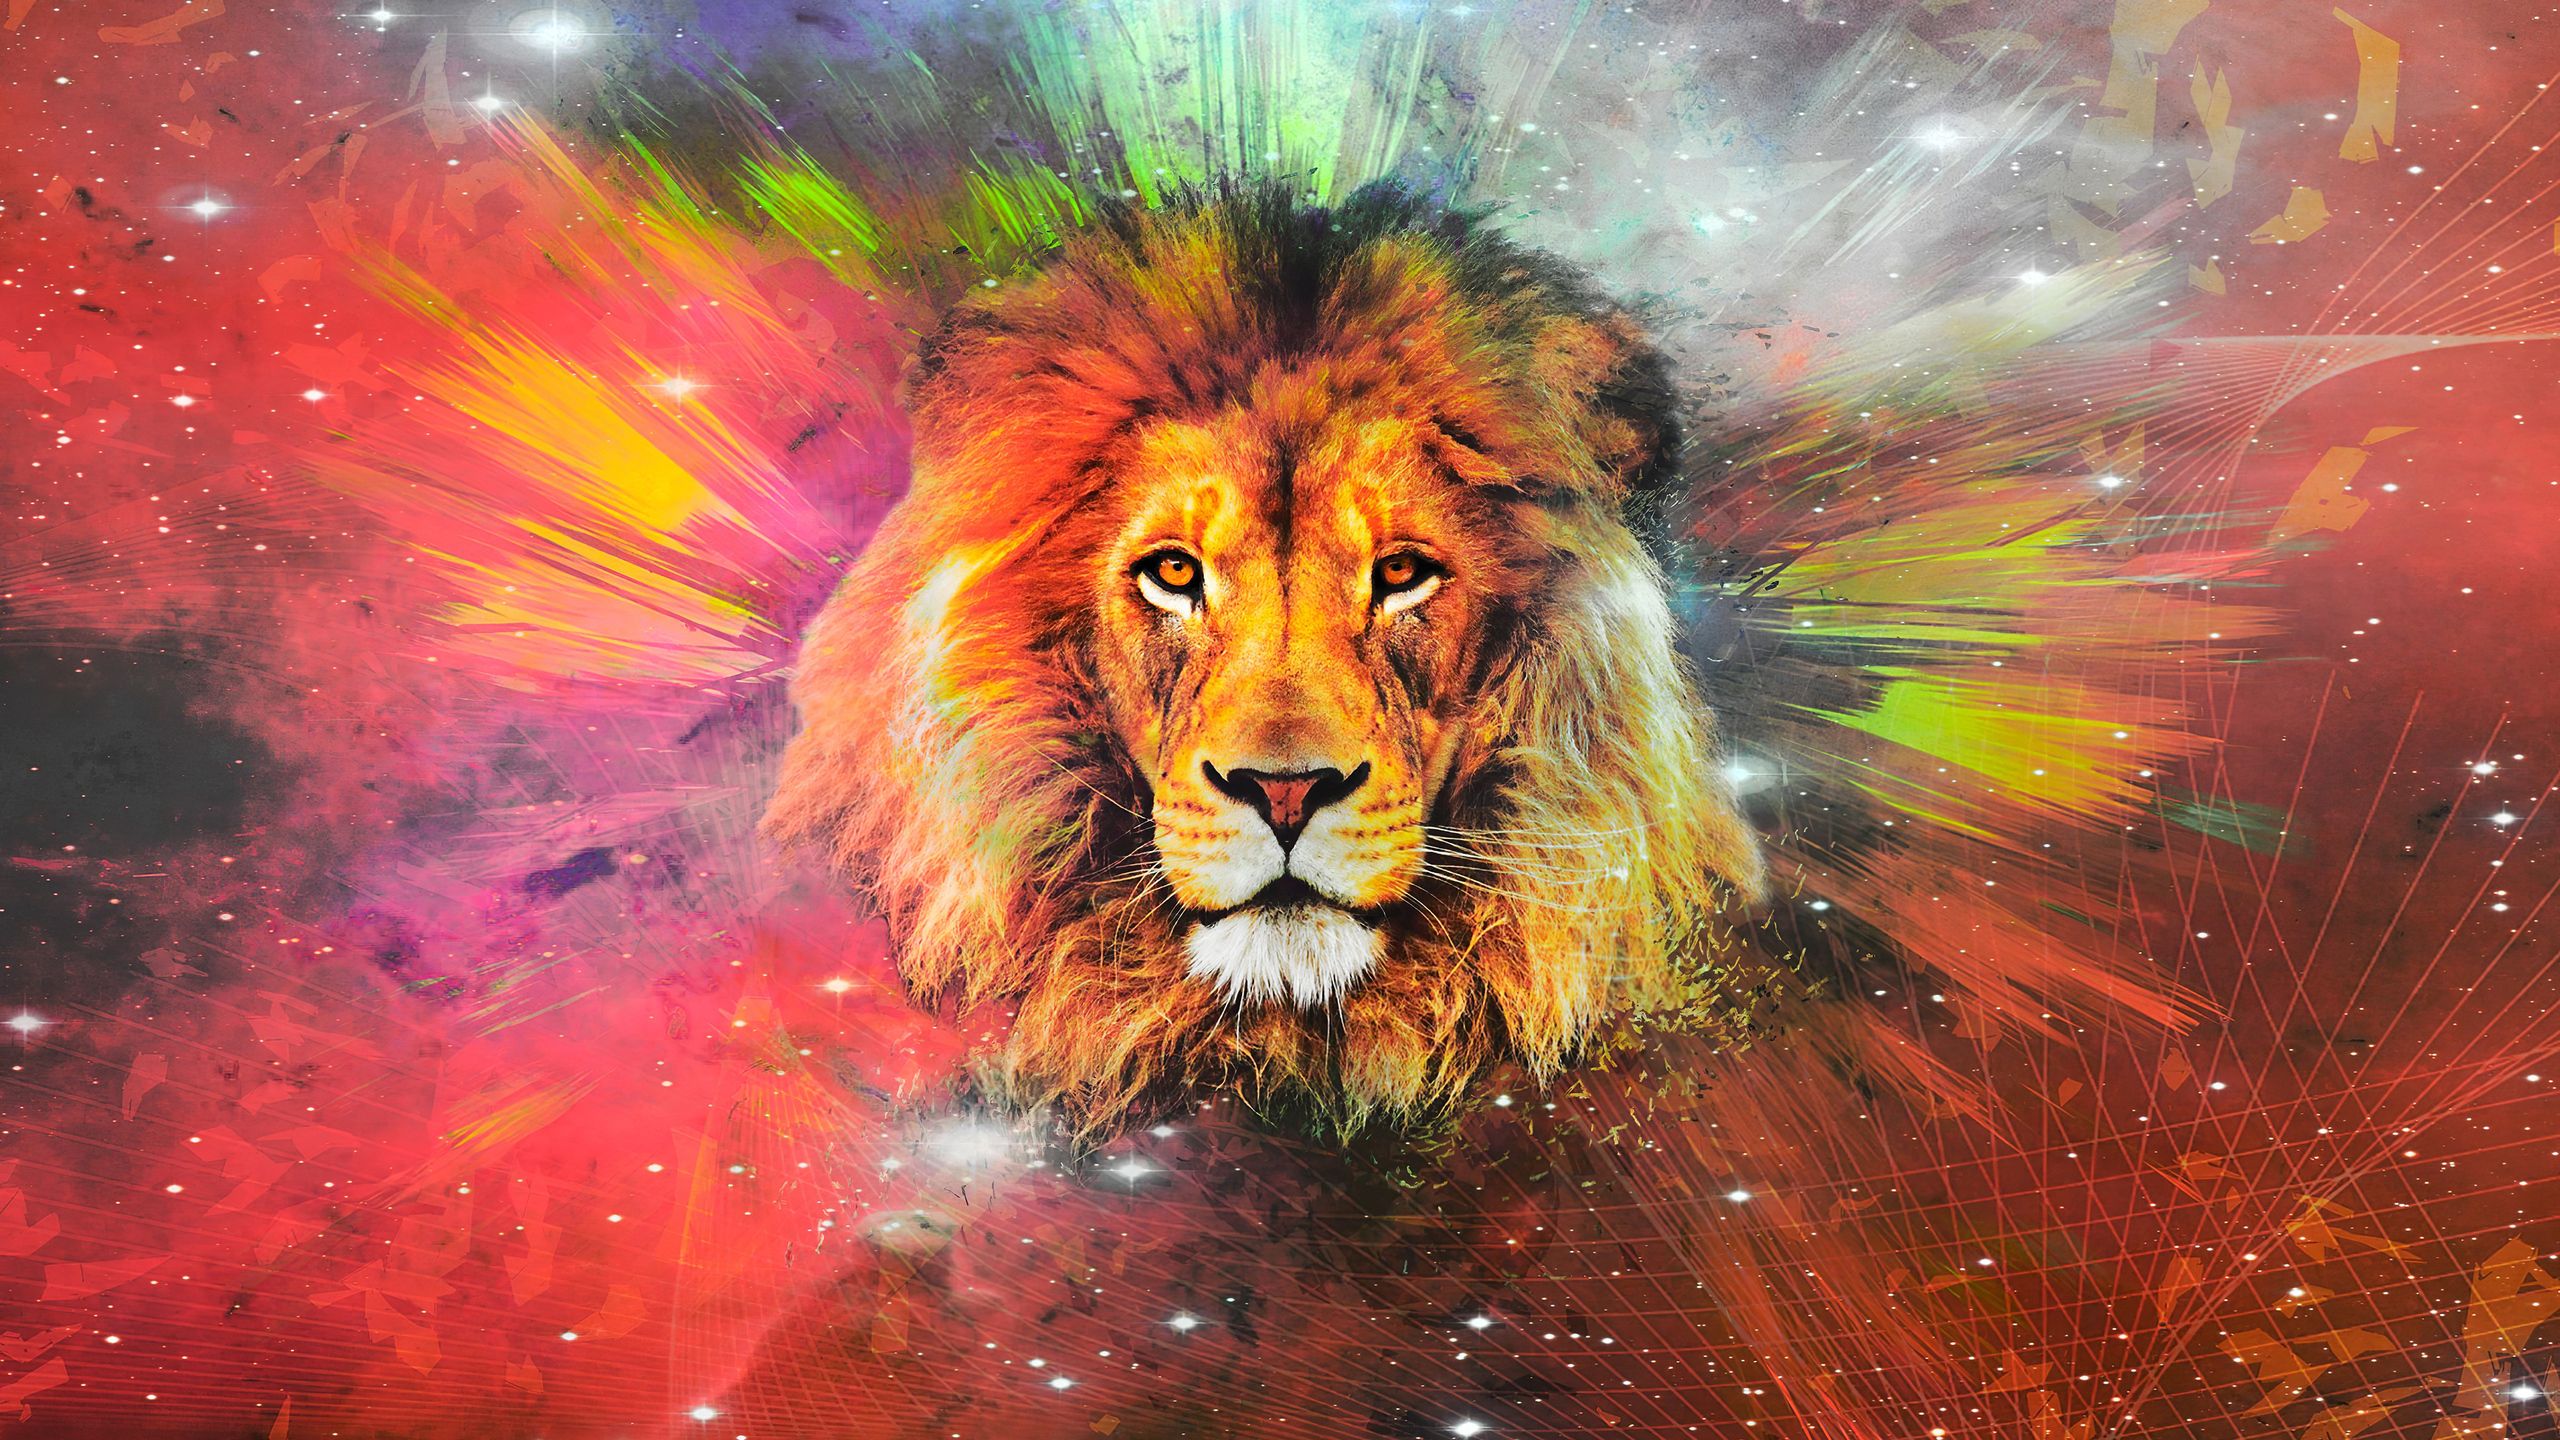 Mobile wallpaper Fantasy Stars Lion Nebula Space Colorful Fantasy  Animals 424144 download the picture for free